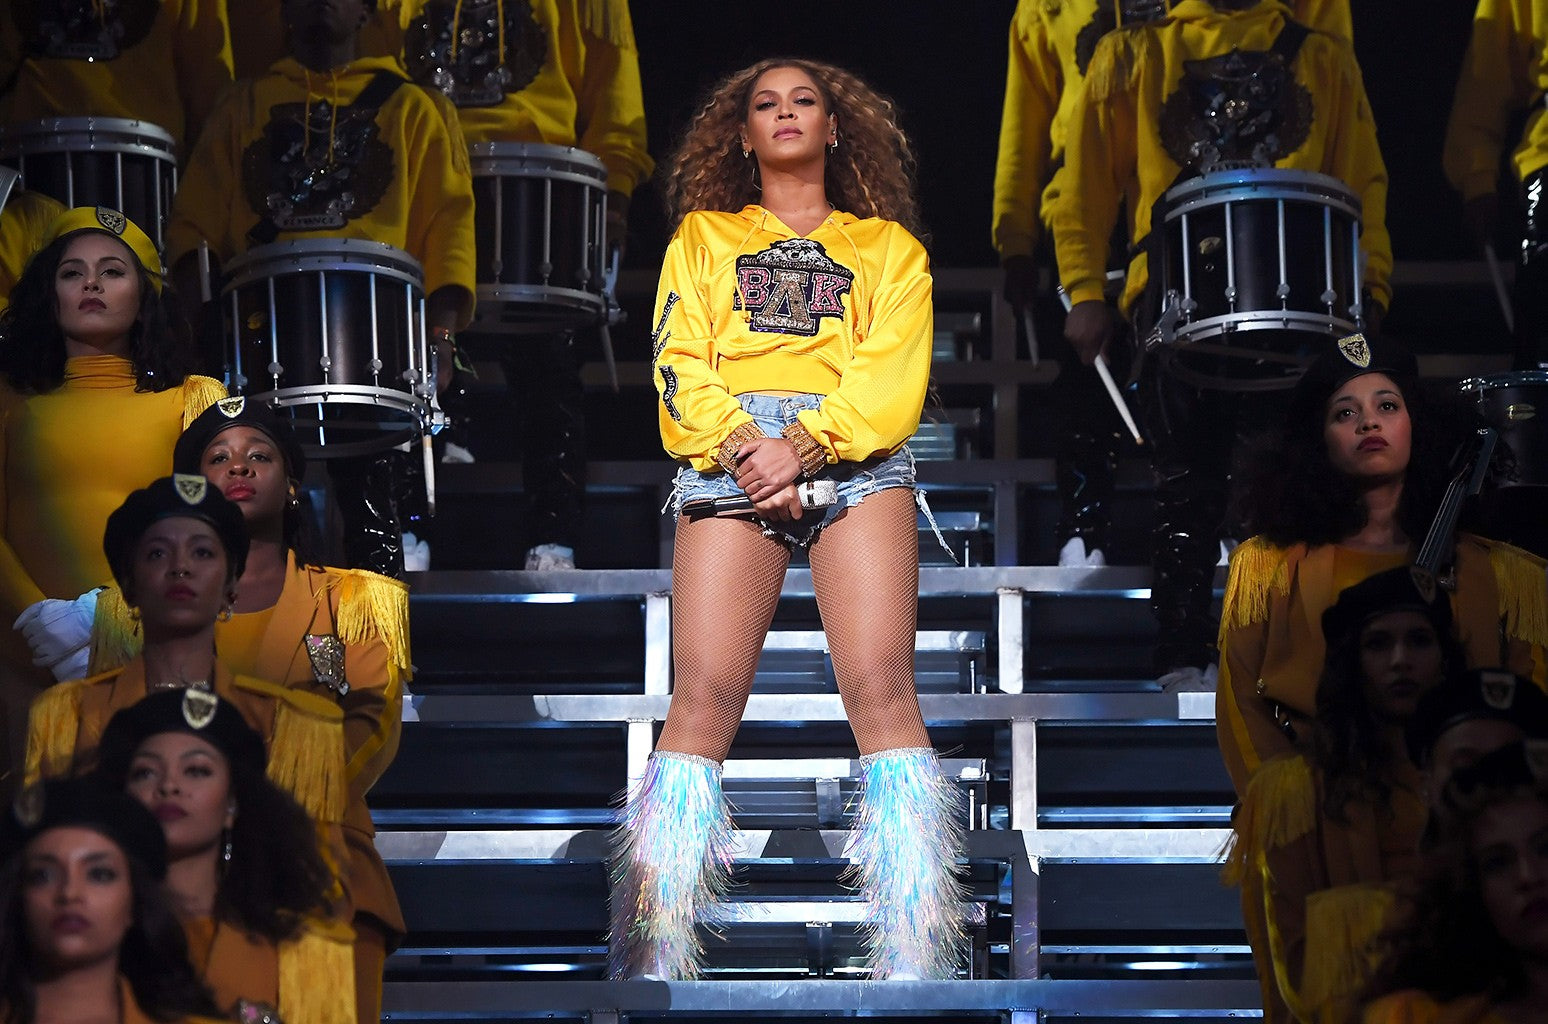 Beyonce Knowles Carter wearing fishnet tights at Coachella 2019 for her Homecoming performance featuring HBCUs